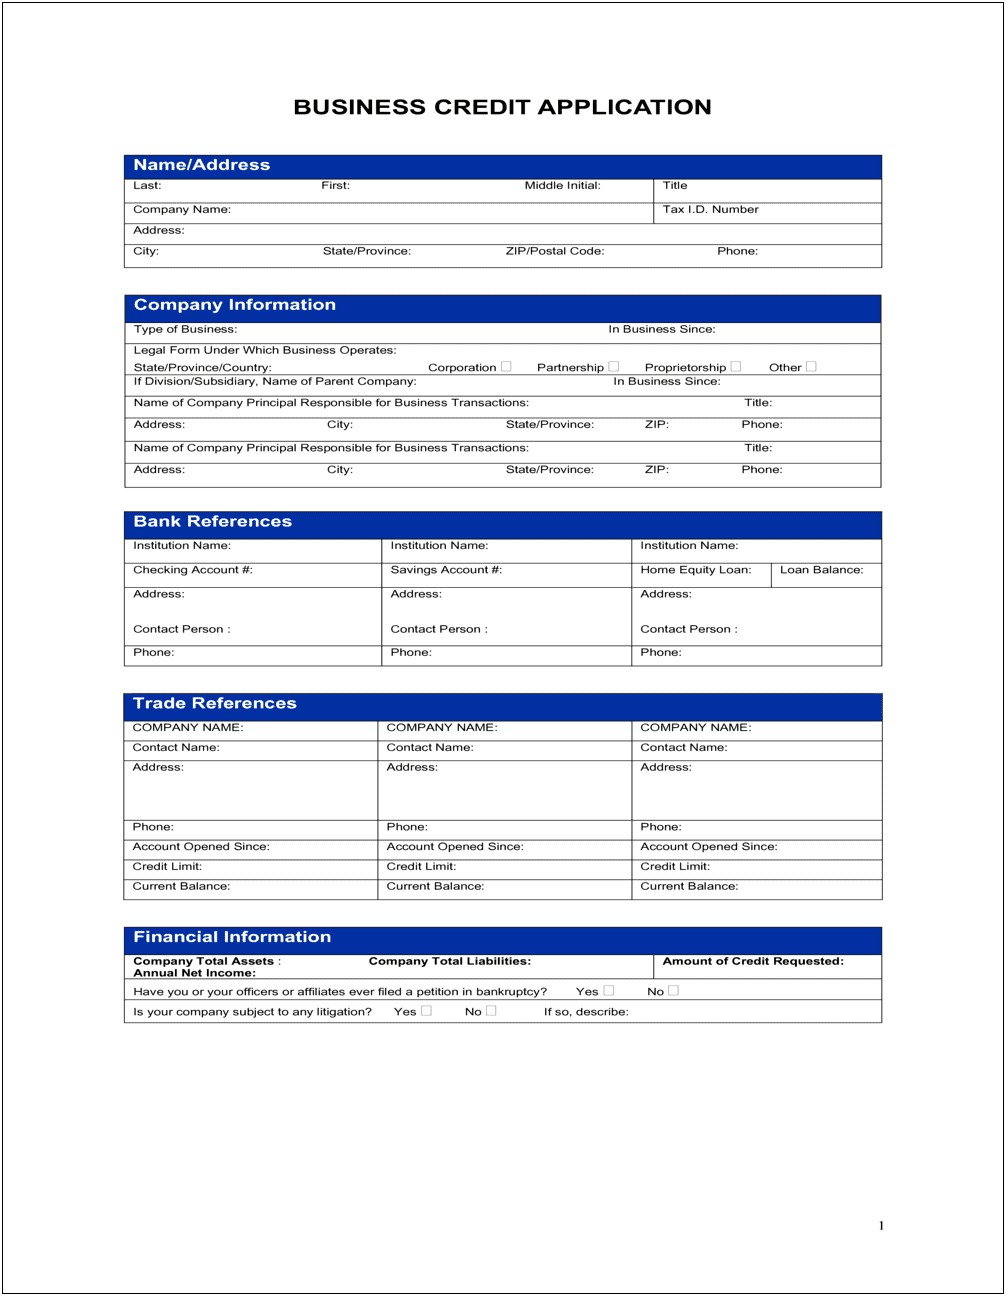 Business Credit Application Form Template Free Australia